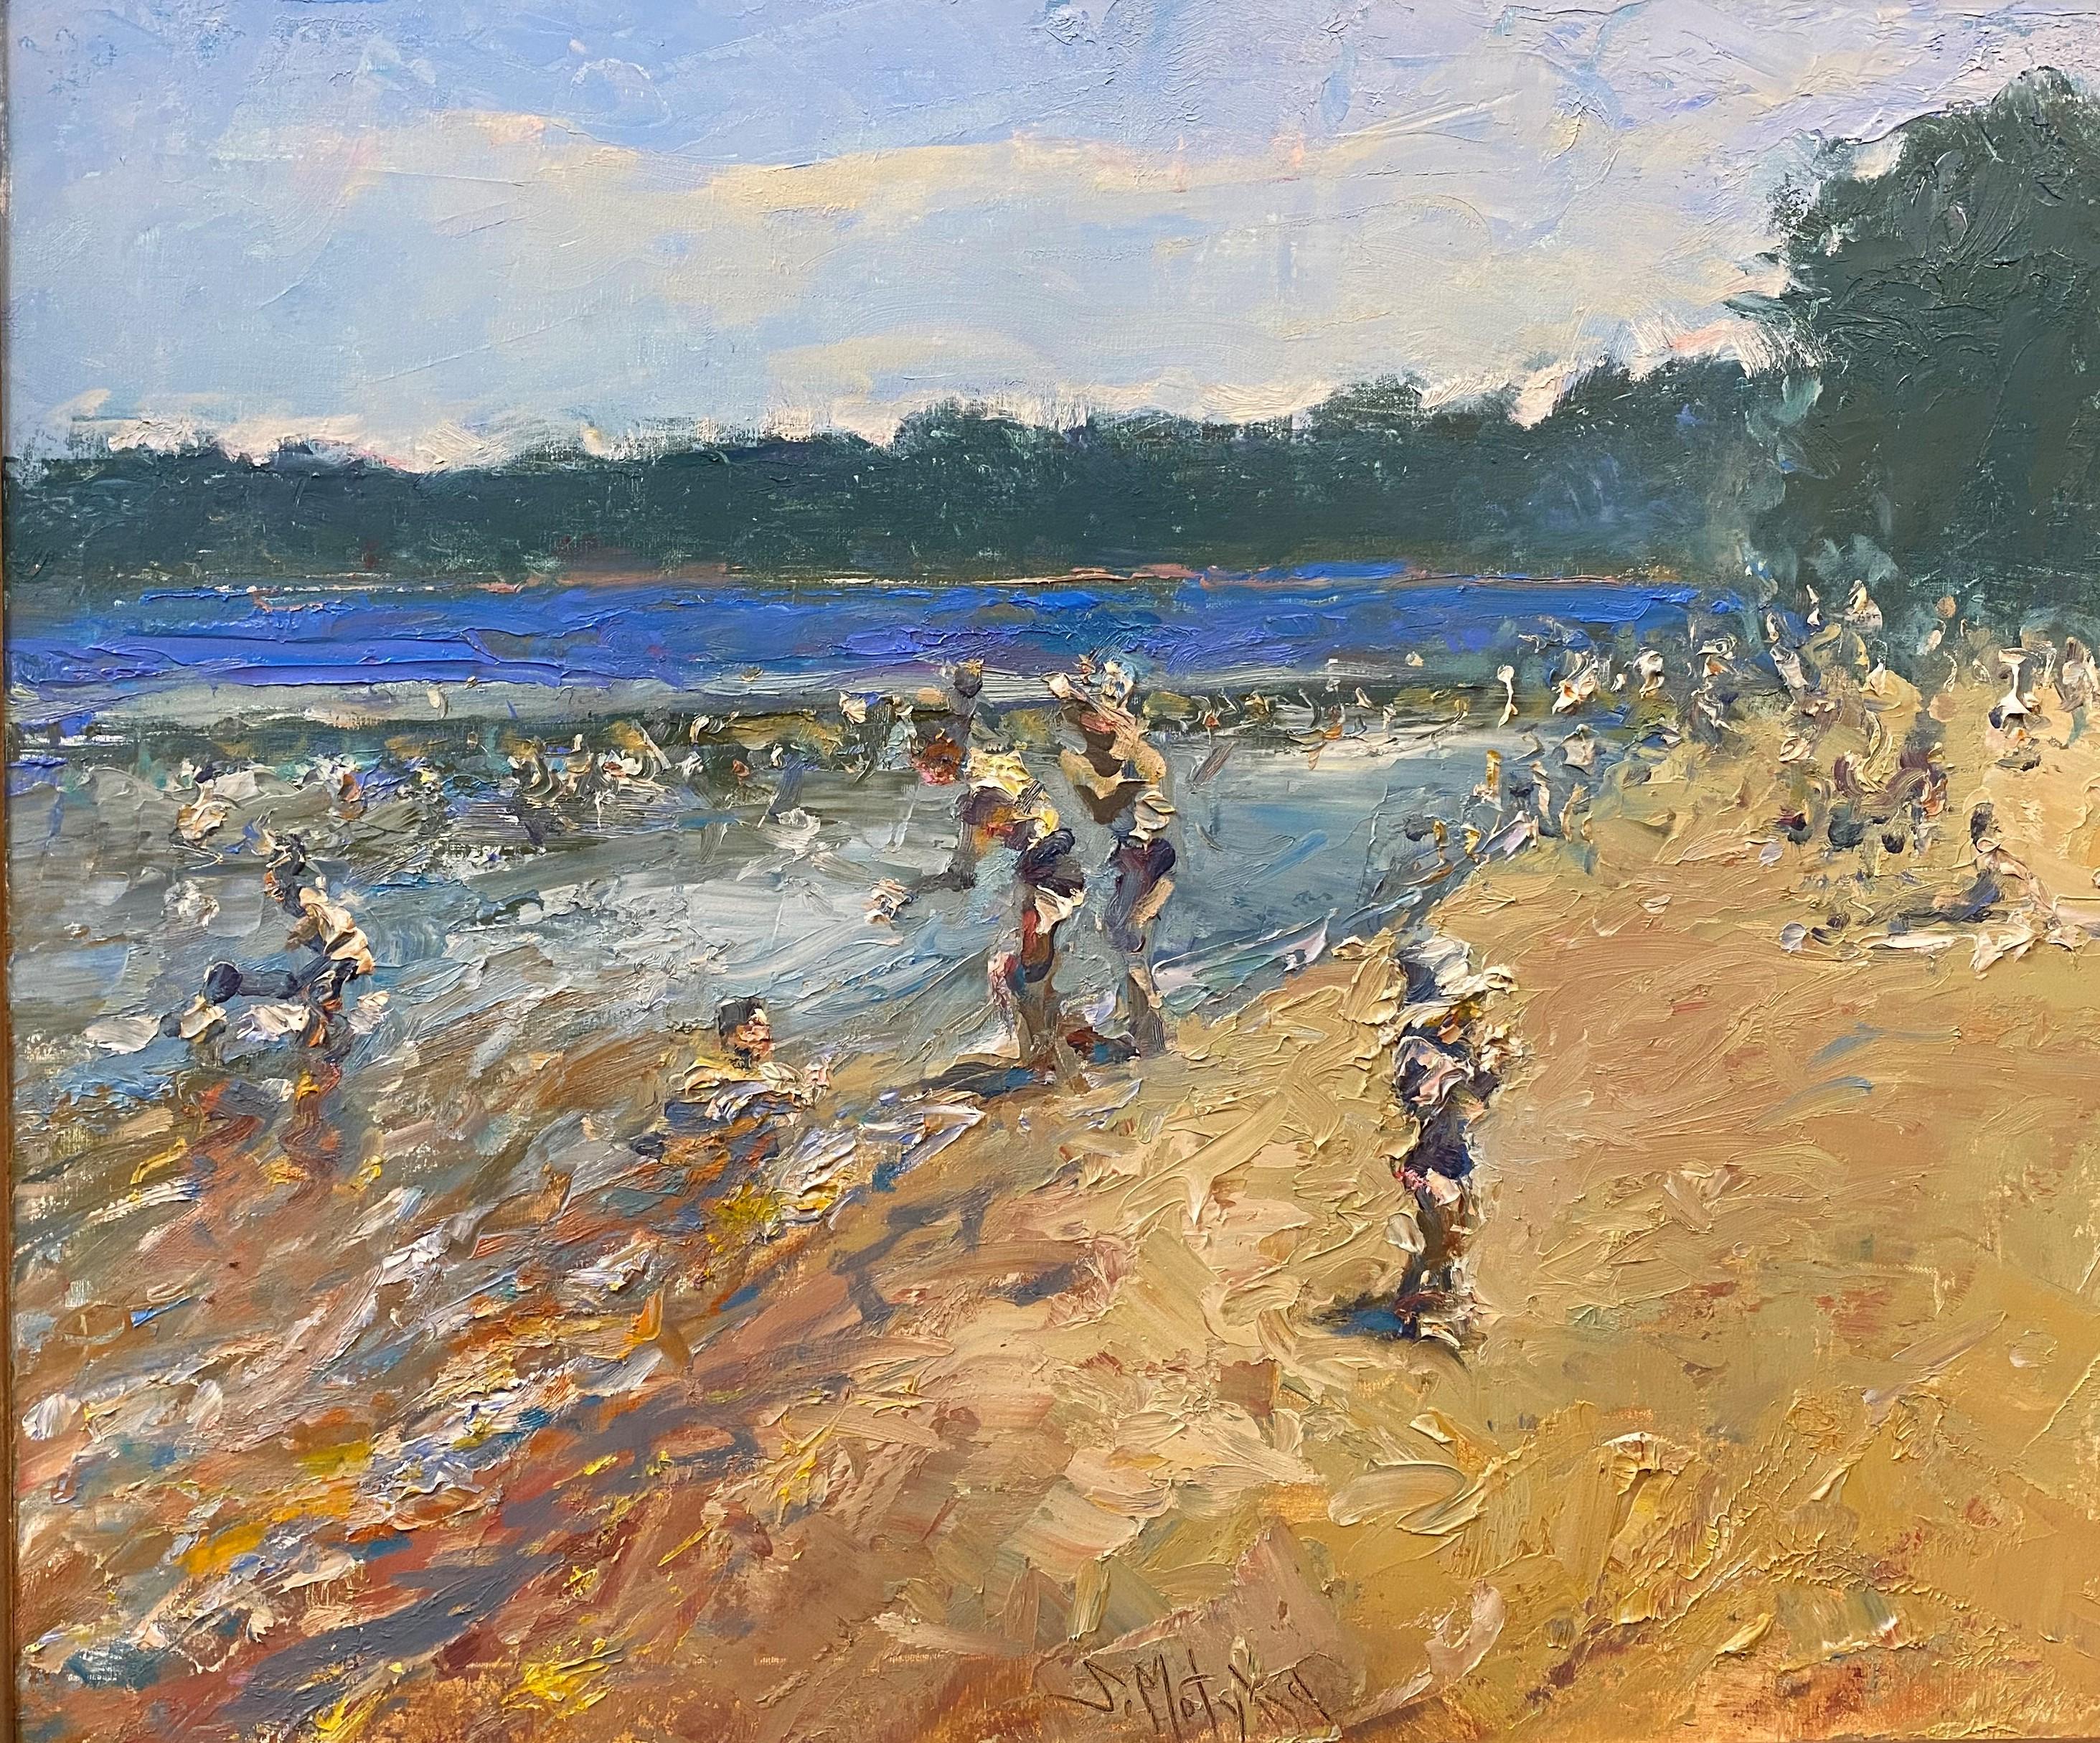 Swimming at Lincoln Woods - Painting by Stephen Motyka